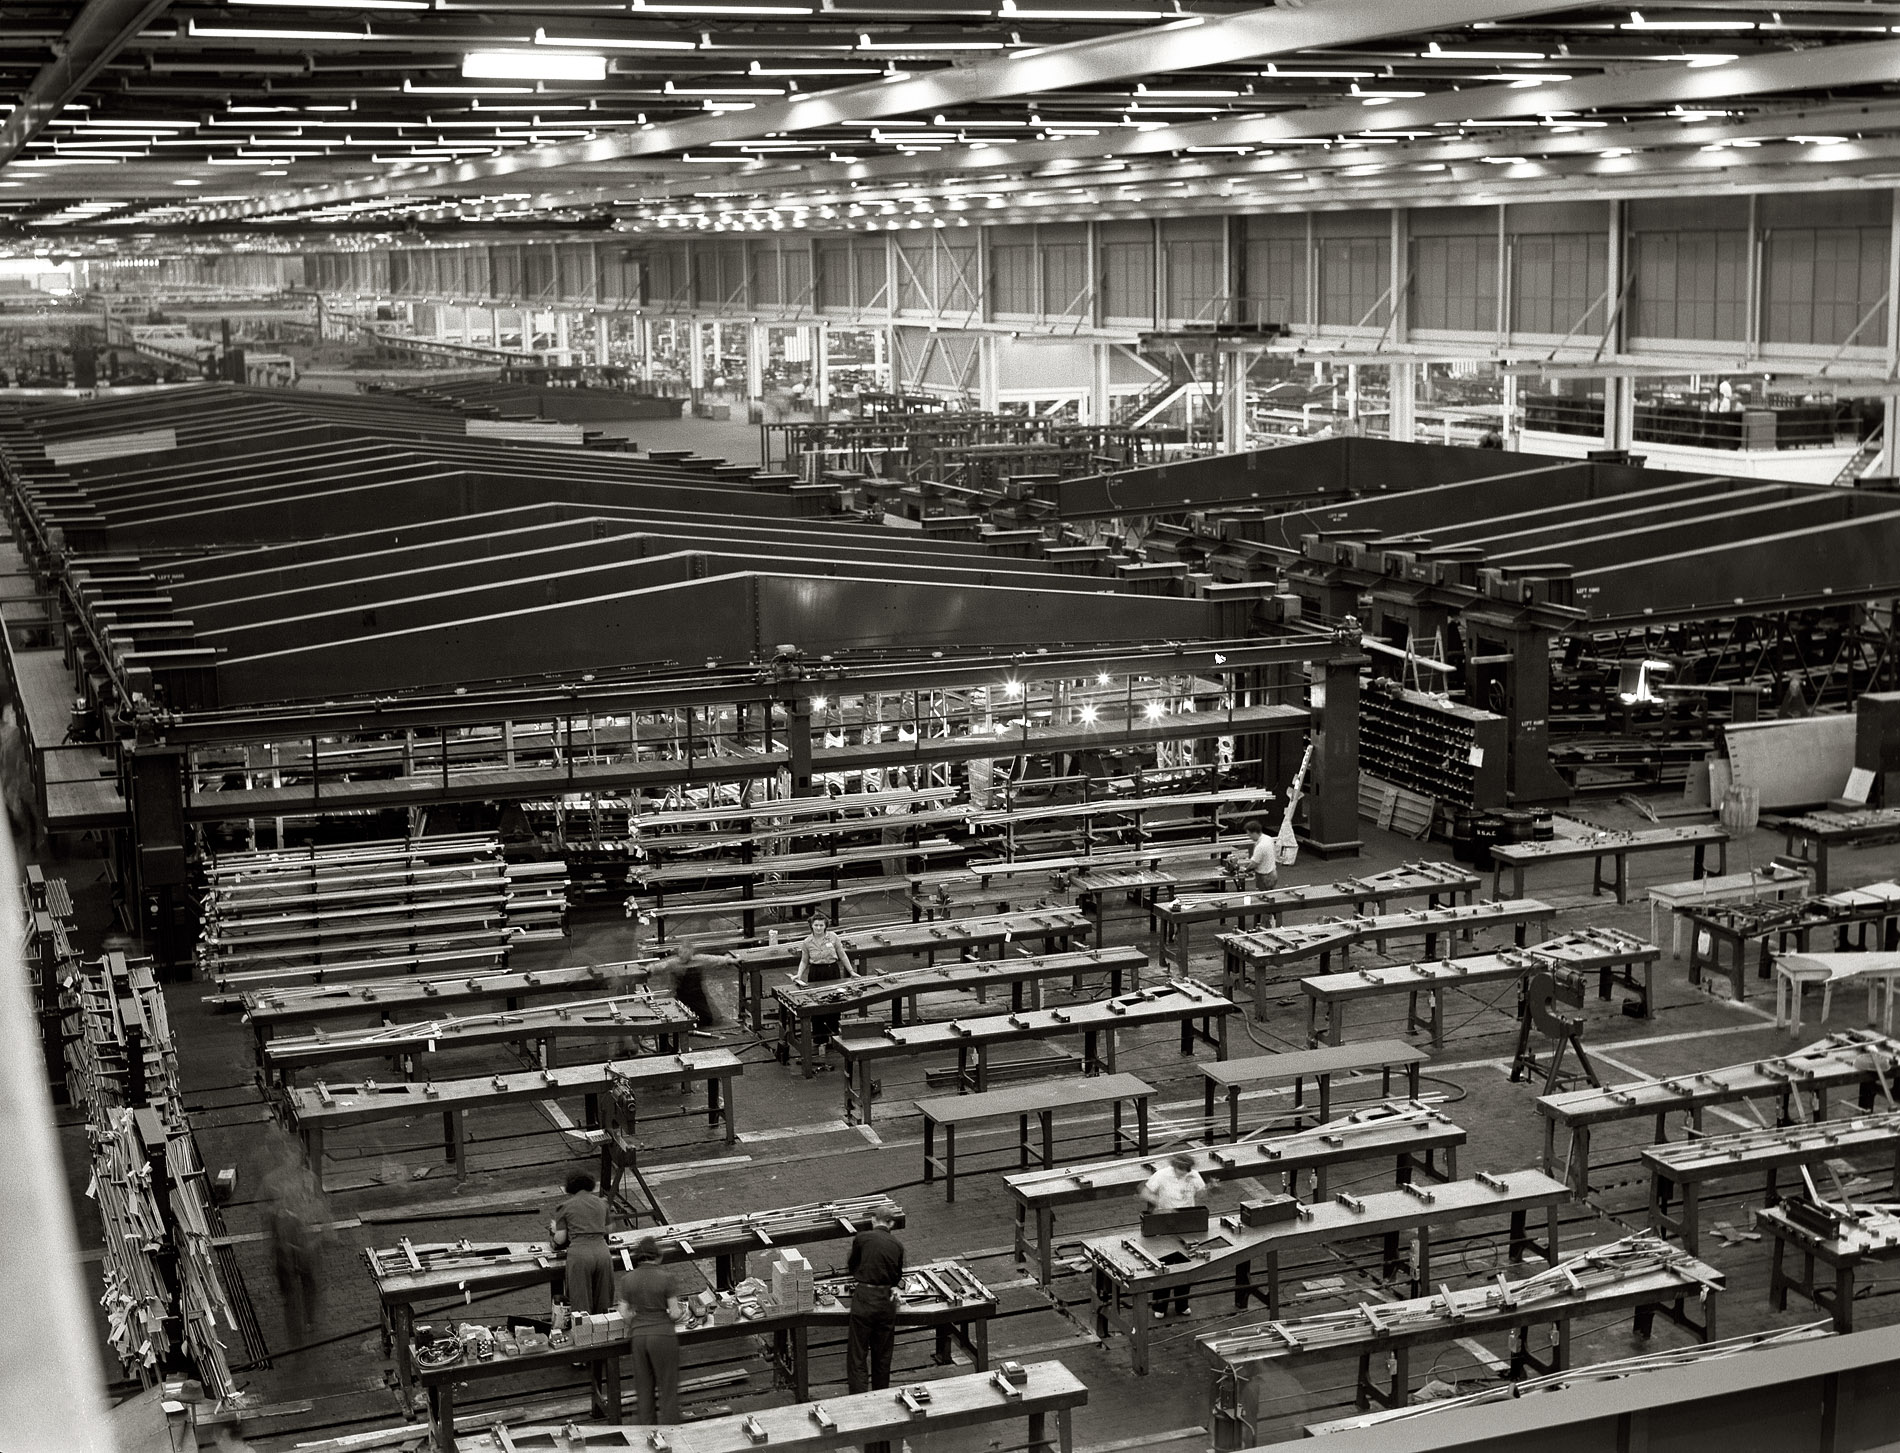 July 1942. "Willow Run bomber plant. A small part of the world's largest one- story war production plant, the giant Ford bomber factory at Willow Run, Michigan. Fixtures in background hold bomber wings during assembly." Photograph by Ann Rosener for the Office of War Information. View full size.